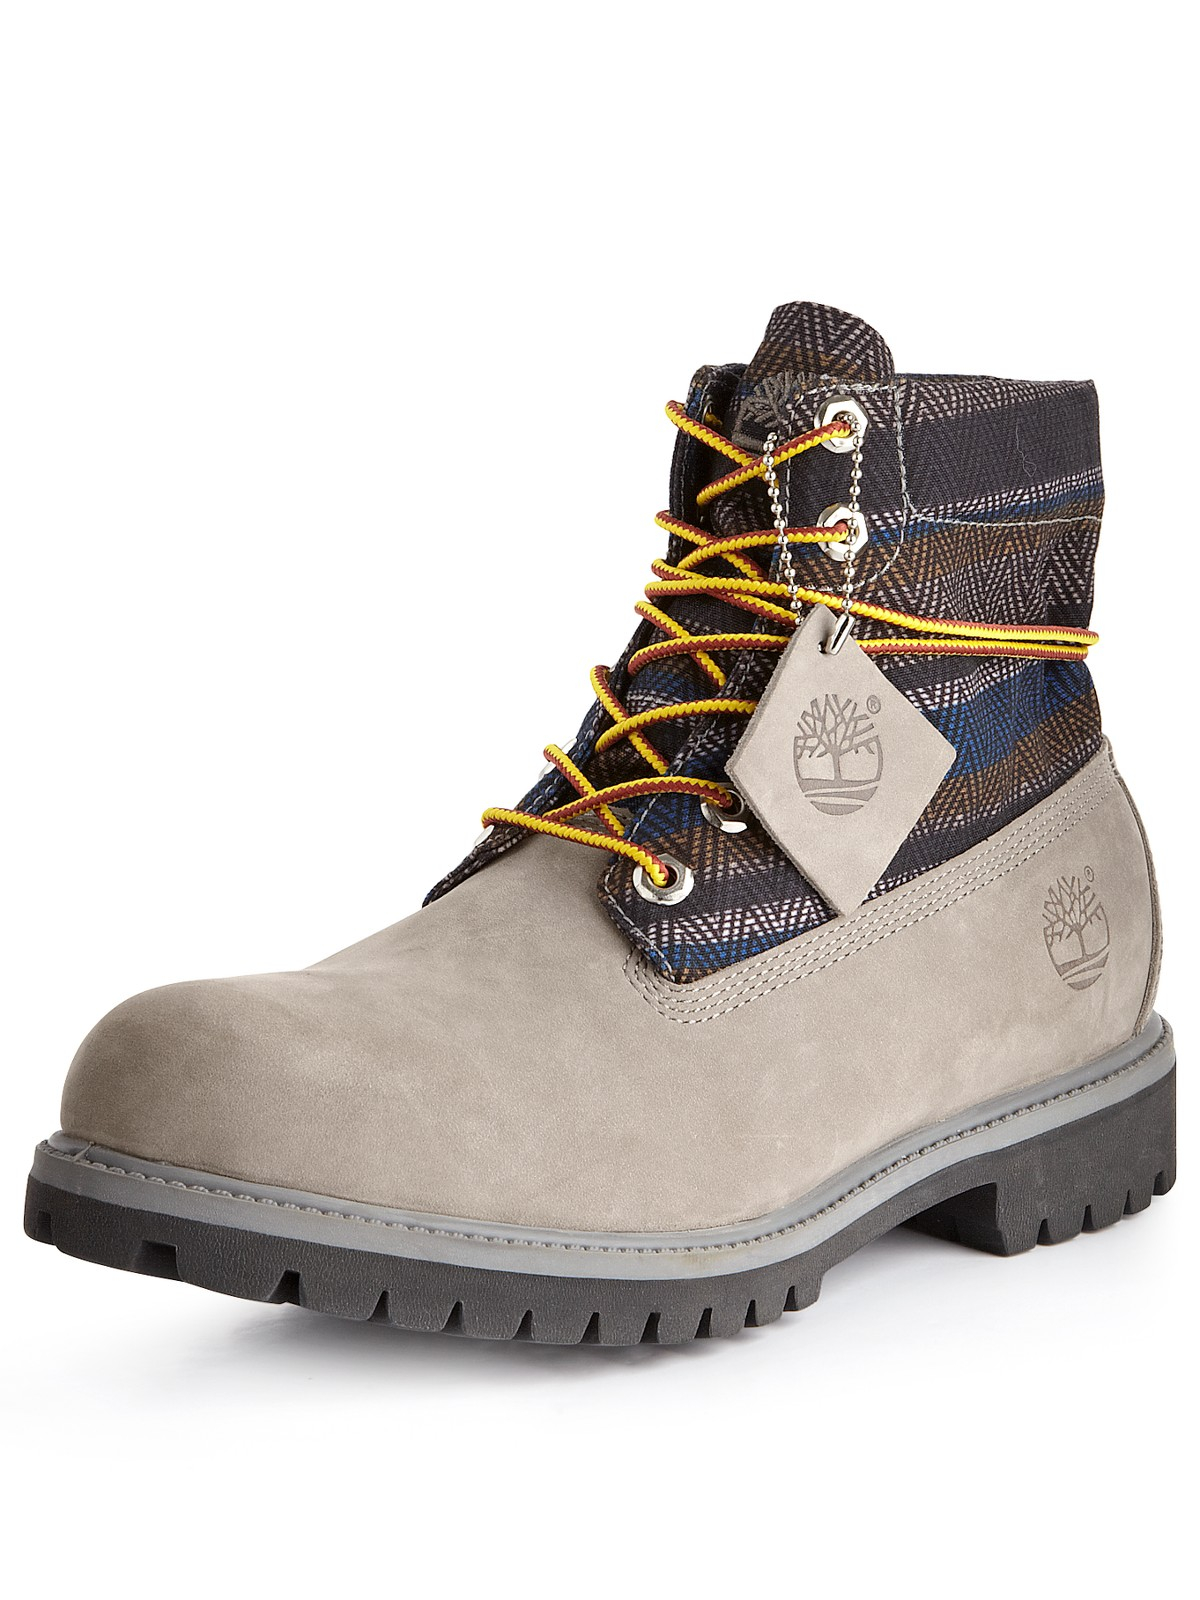 boots mens timberland roll grey shoes nubuck gray timberlands boot latest shoe prd tops clothing wear